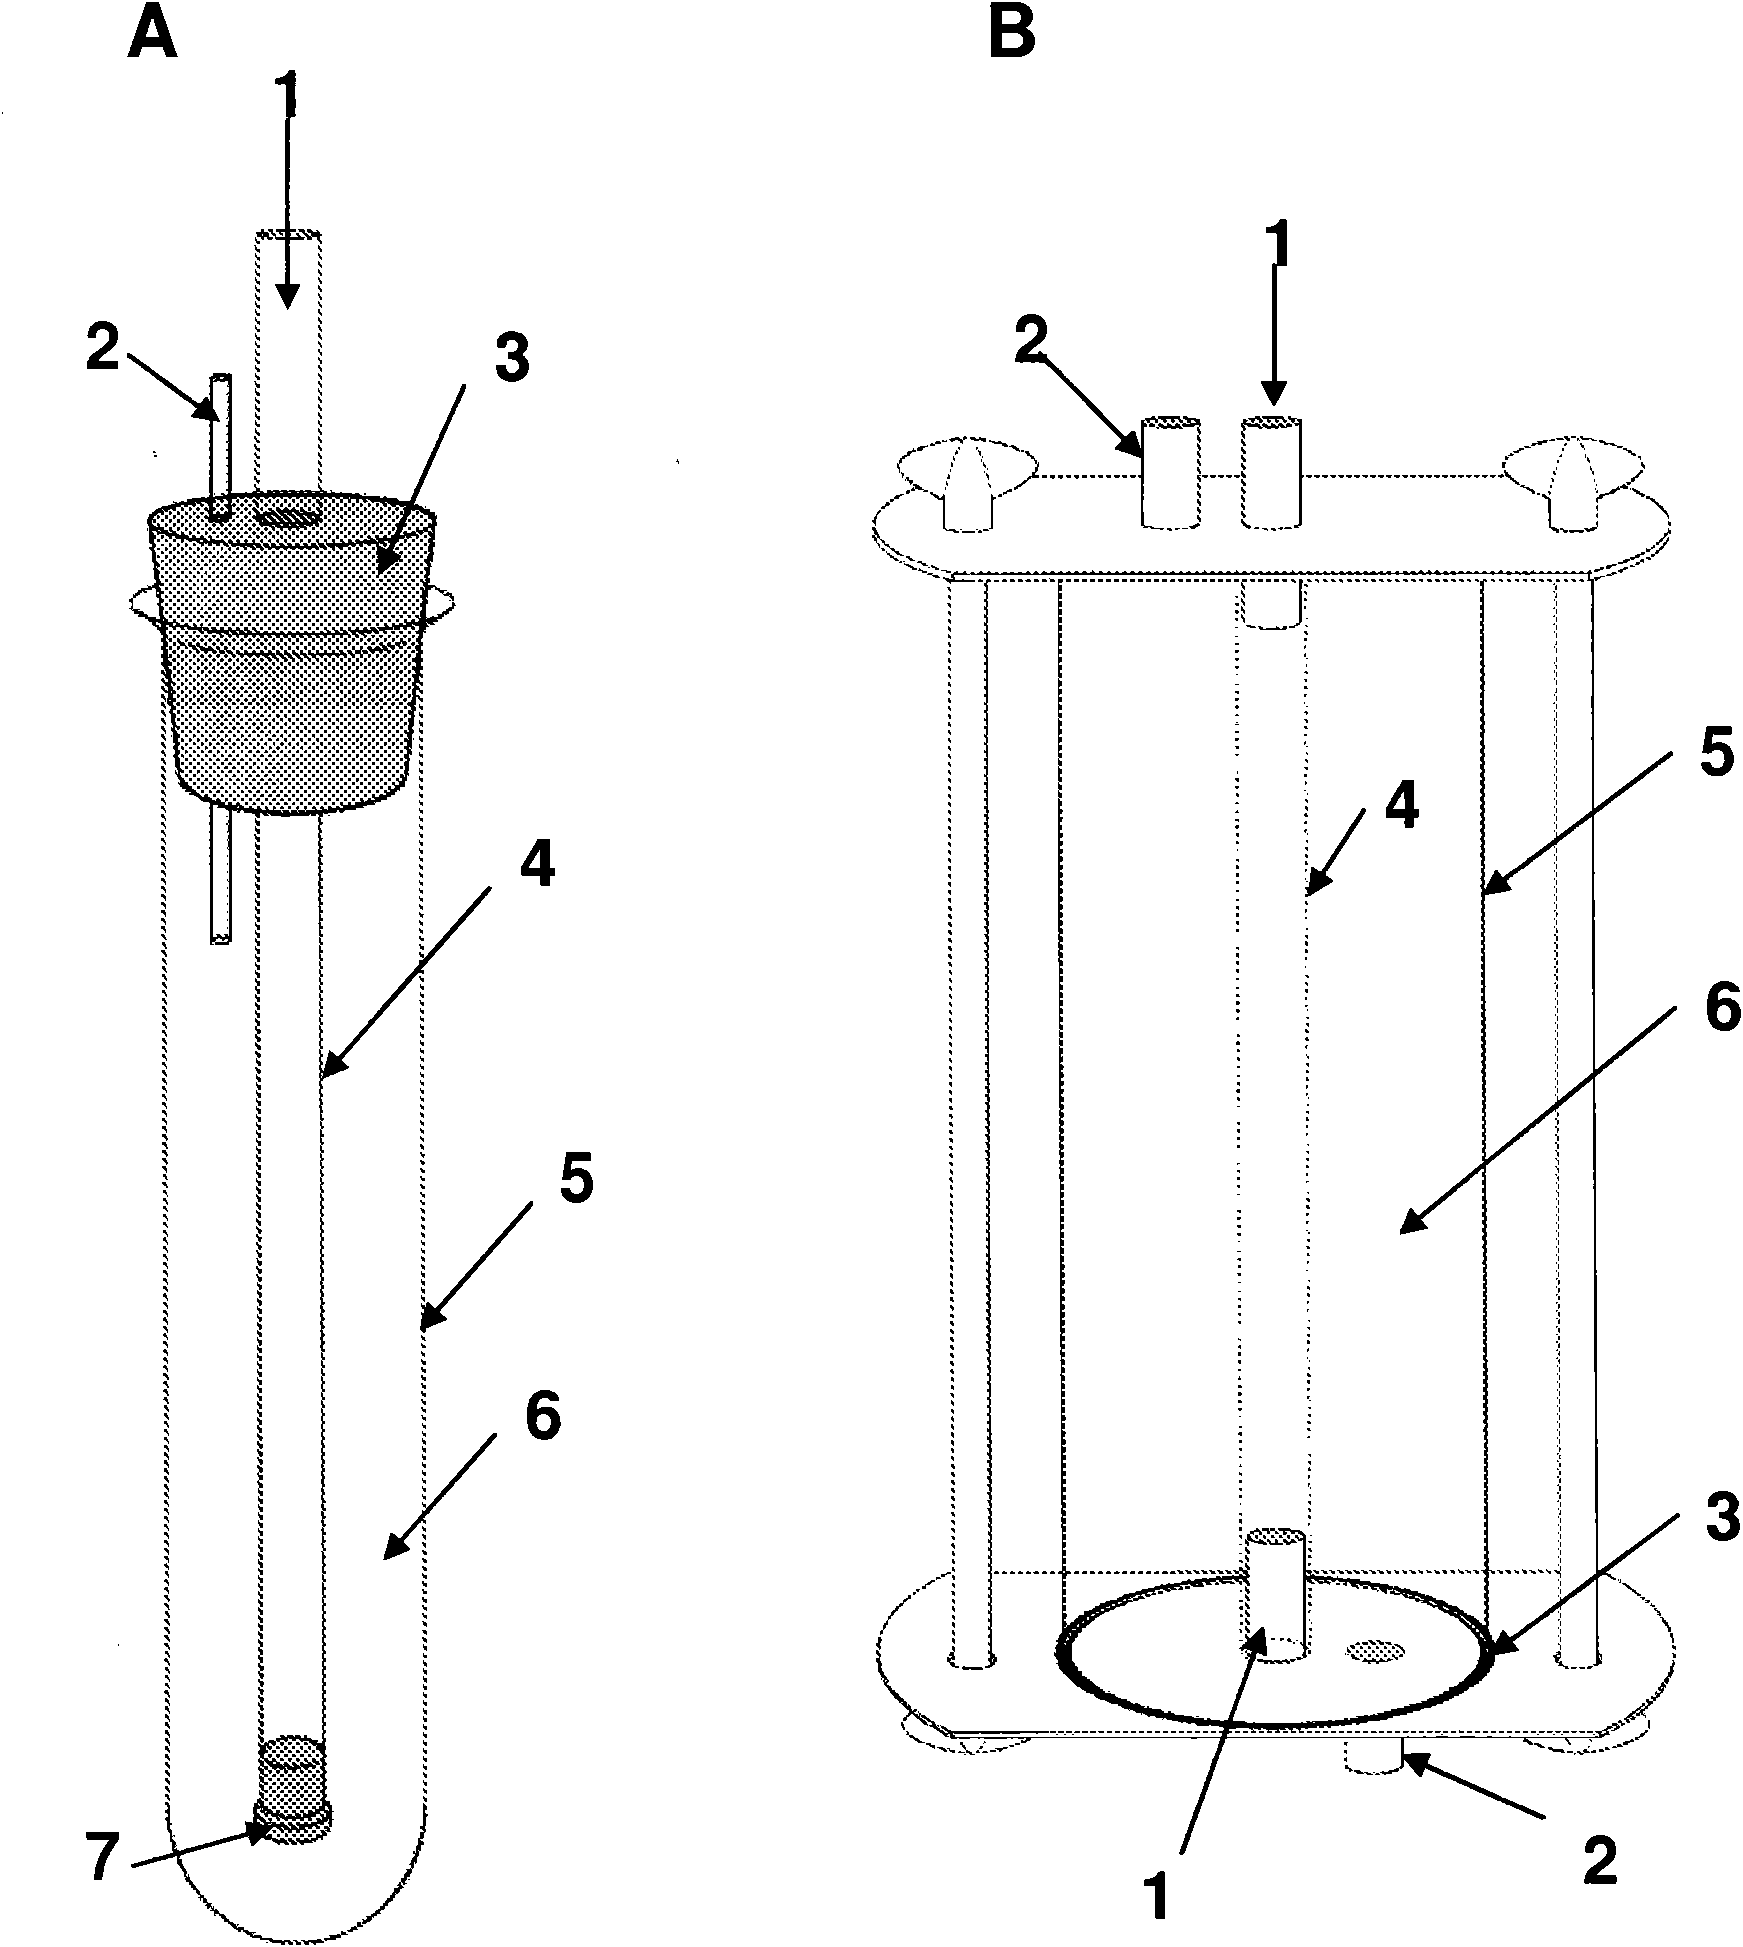 Process for the preparation of hollow cellulose vessels by culturing cellulose- producing microorganisms on the surface of a hollow carrier and providing a gas having an oxygen level of at least 35%